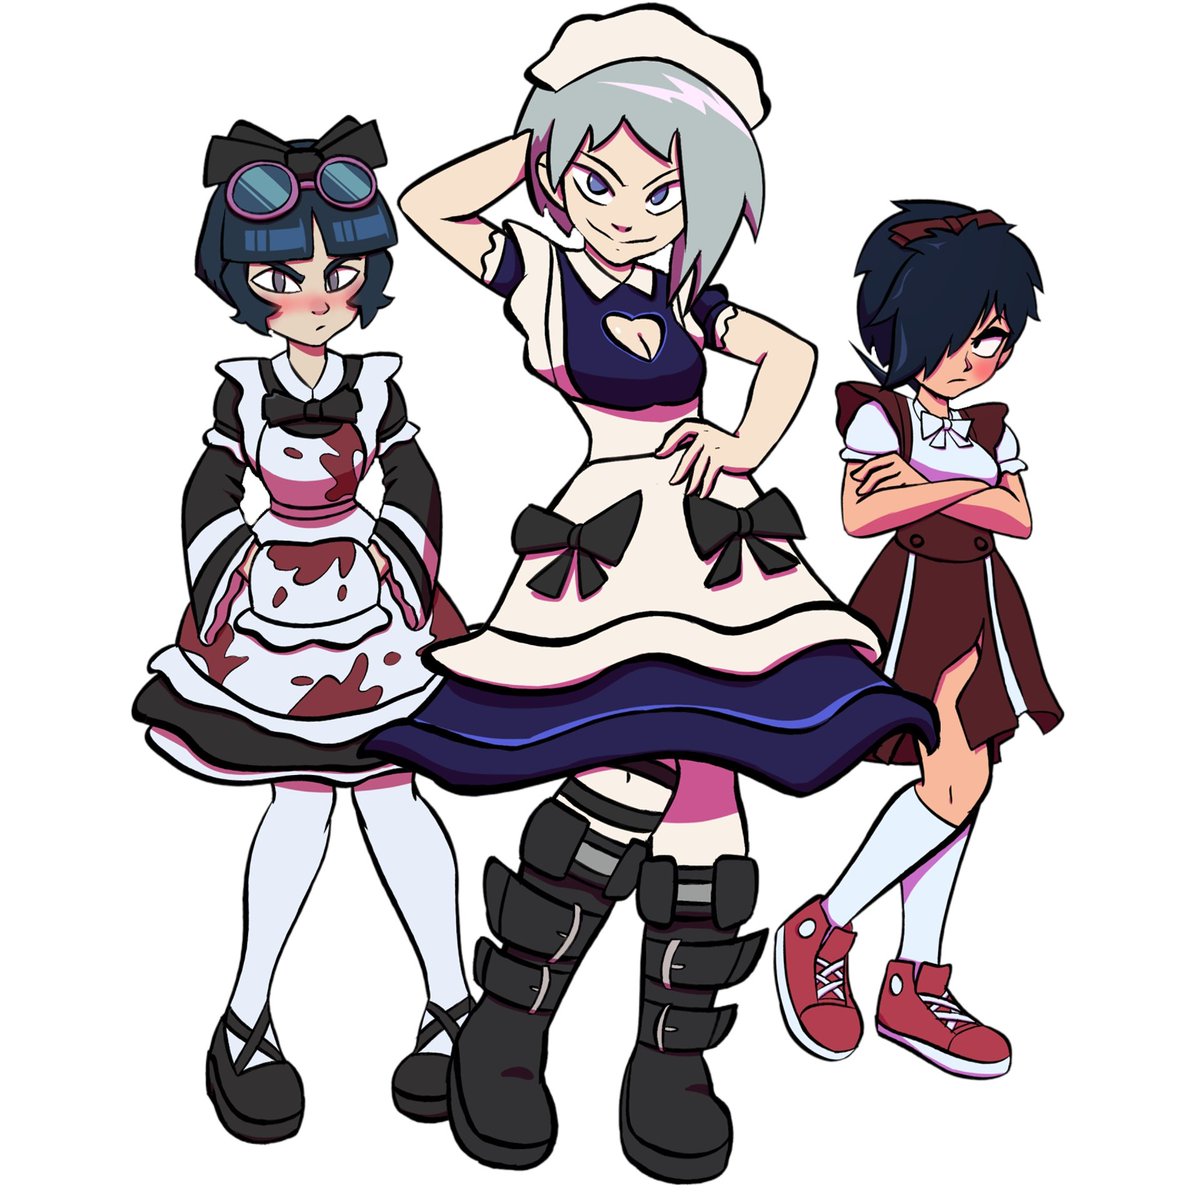 In #Griptapehavok You'll be able to unlock many different outfit sets including the Maid to Skate and Halloween sets! 

Art by @JeremyMomu

#IndieGameDev #indiegames https://t.co/r8TZdA8G5P